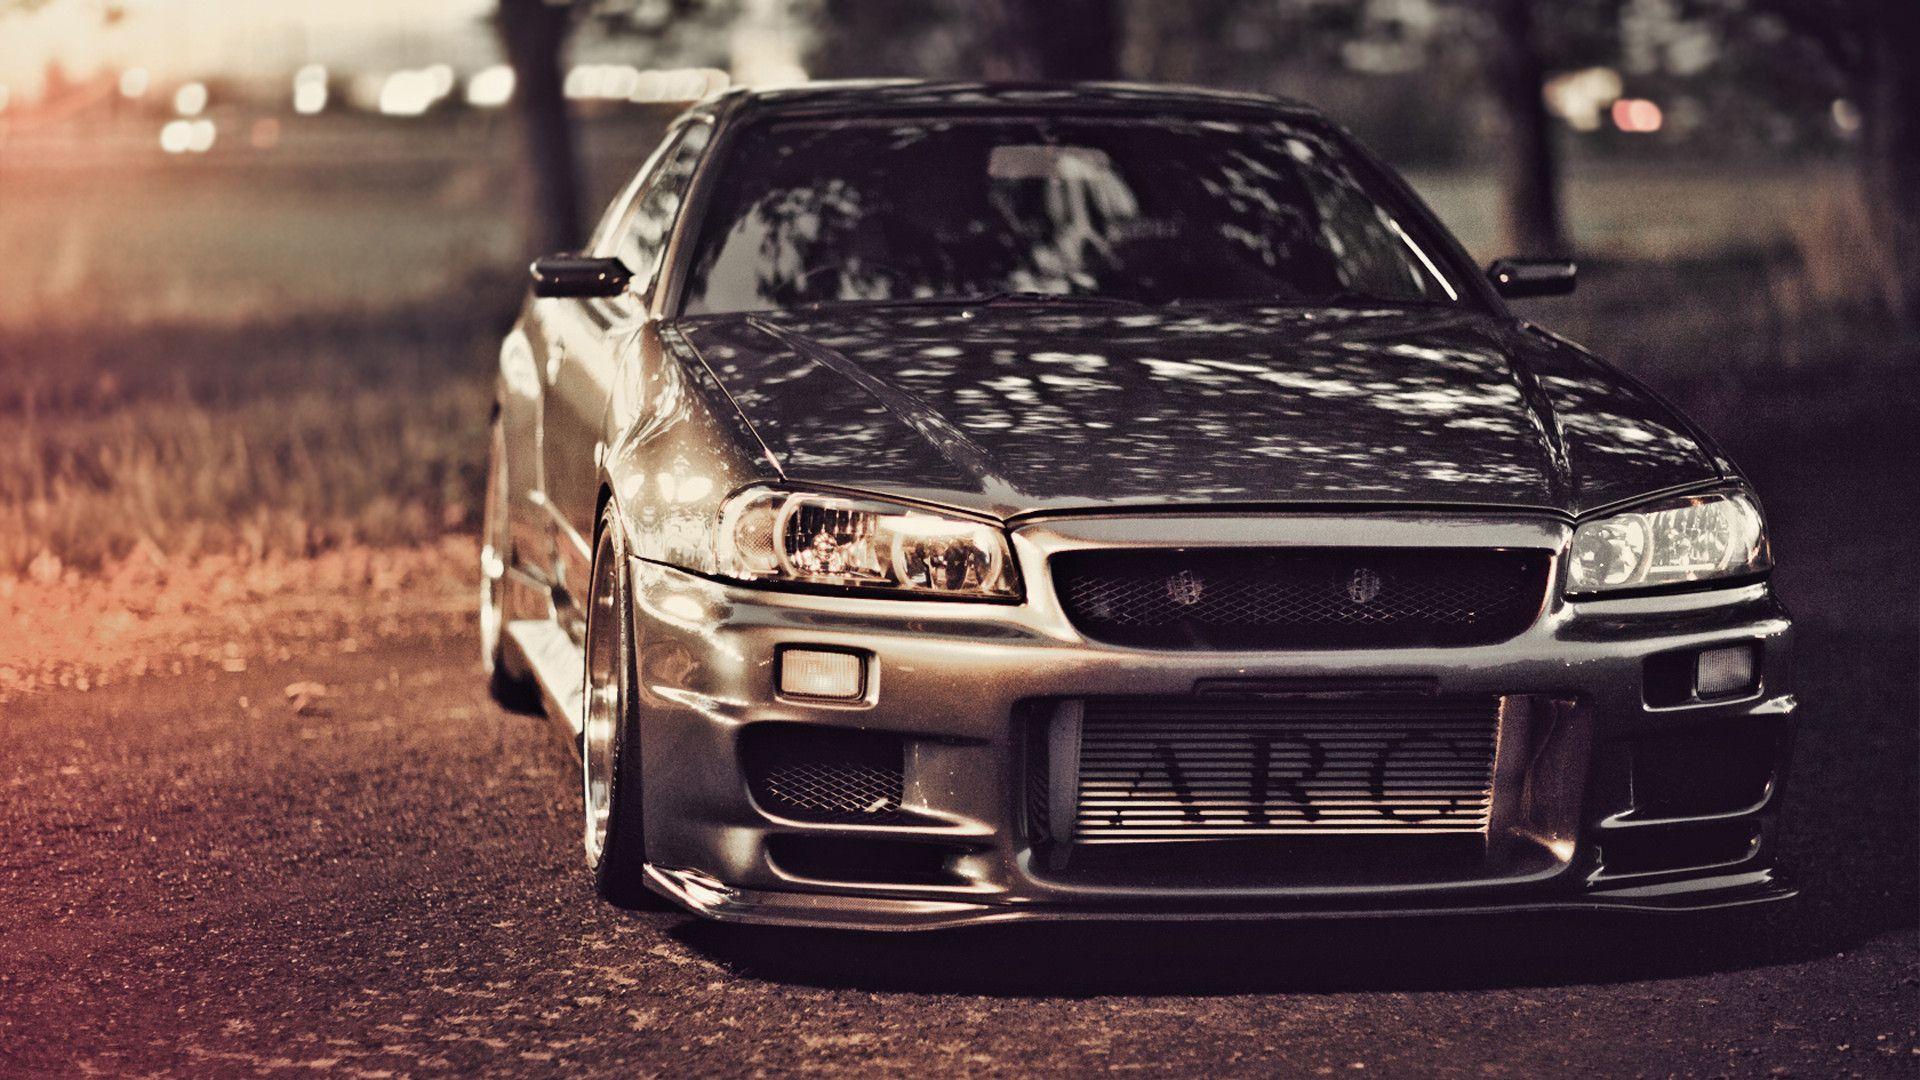 R34 Phone Wallpapers  Top Free R34 Phone Backgrounds  WallpaperAccess